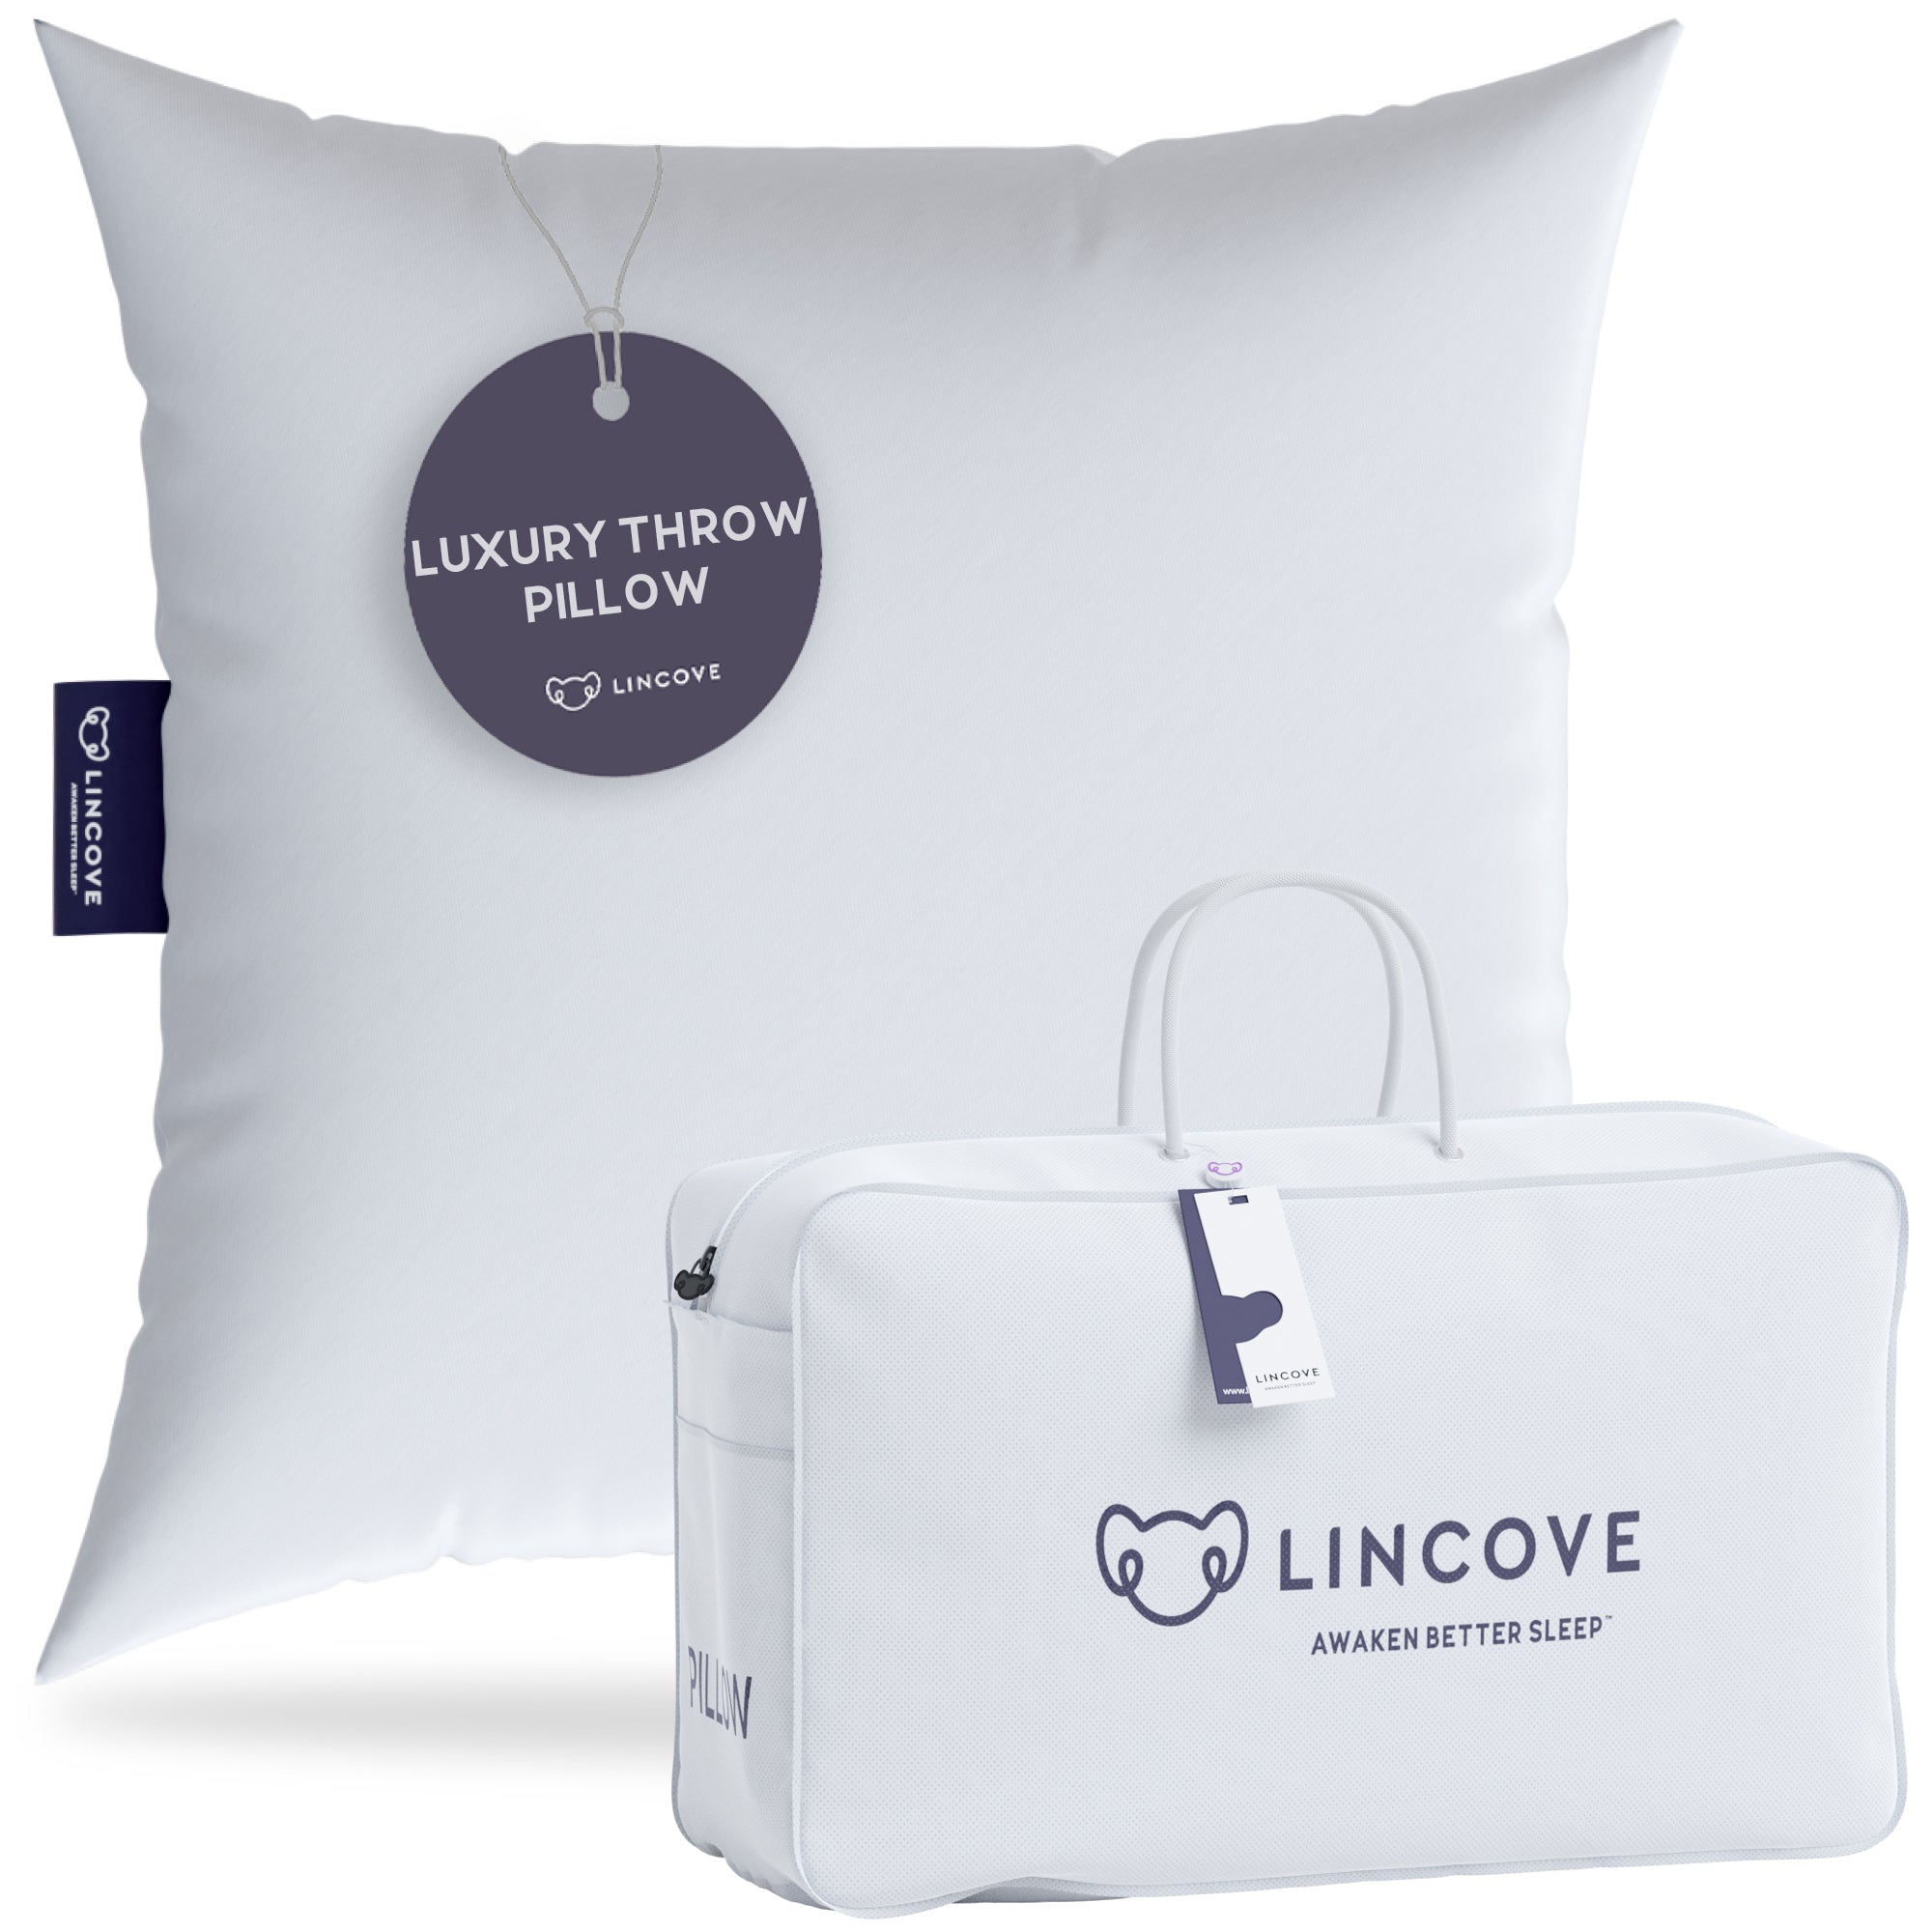 Synthetic Down (Hypoallergenic) Pillow Inserts - sizes 12 to 18